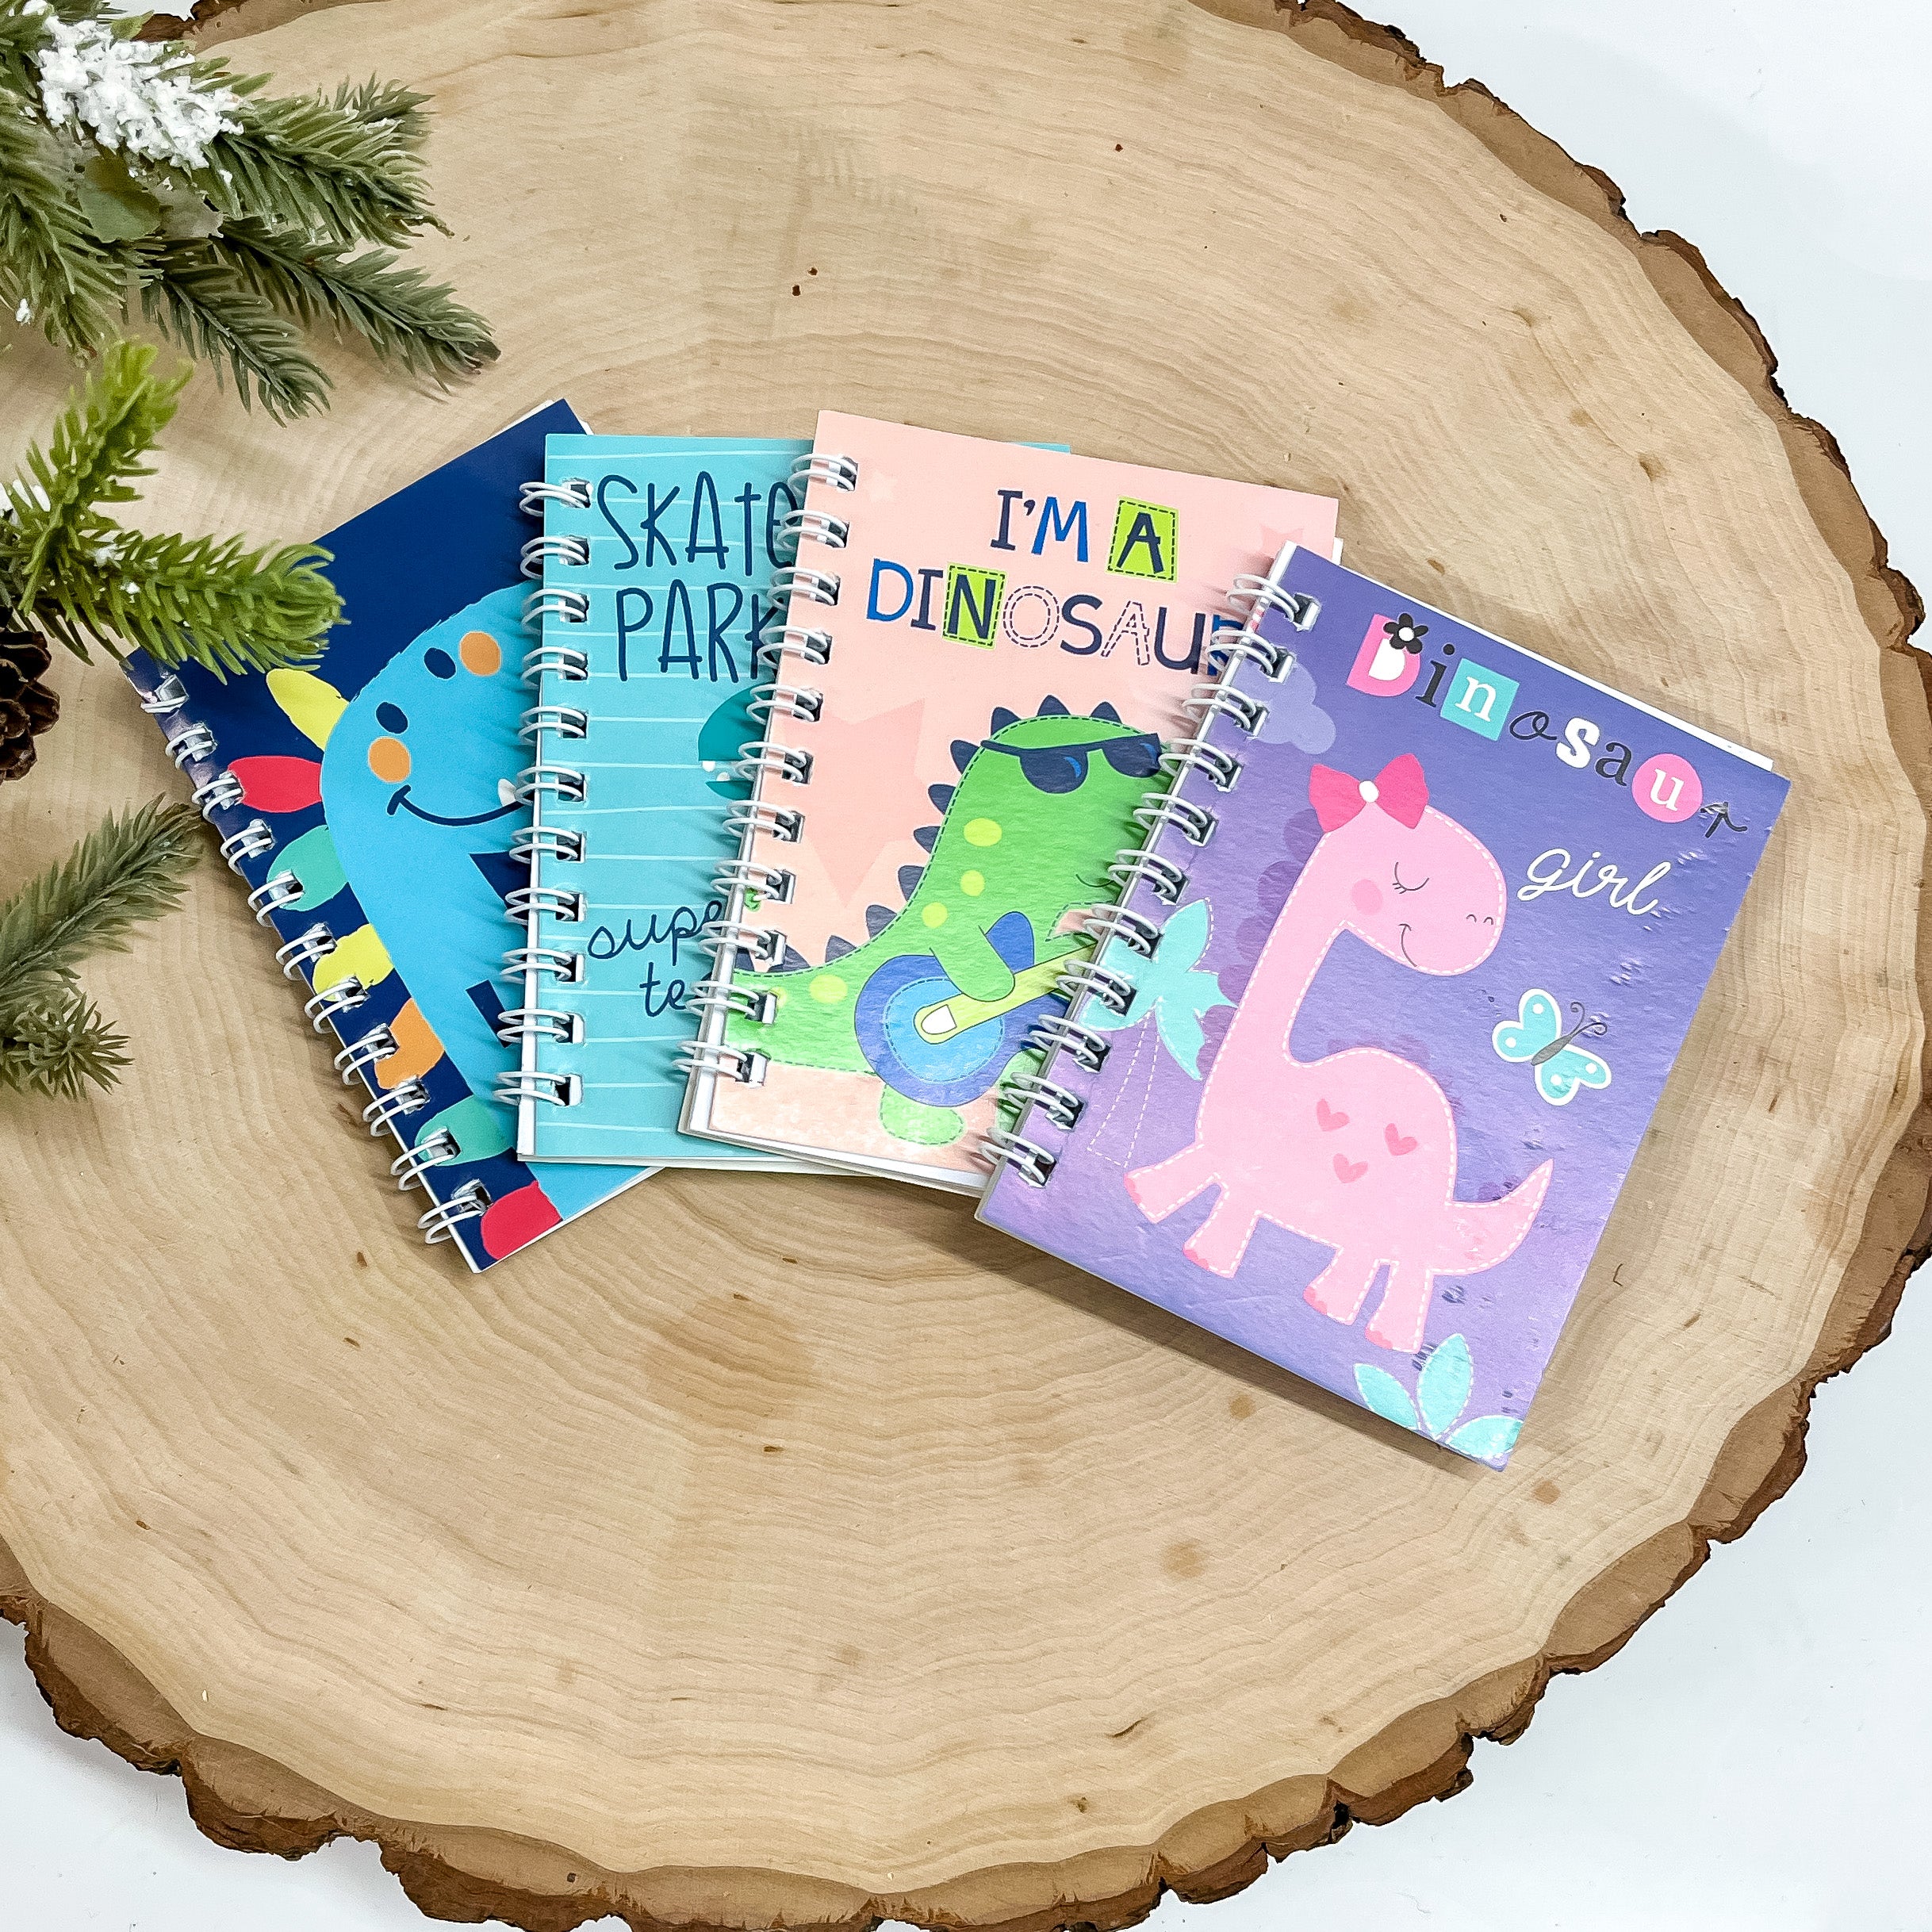 Four small books with dinosaurs on the covers are pictured on a piece of wood. This is all pictured on a white background. 